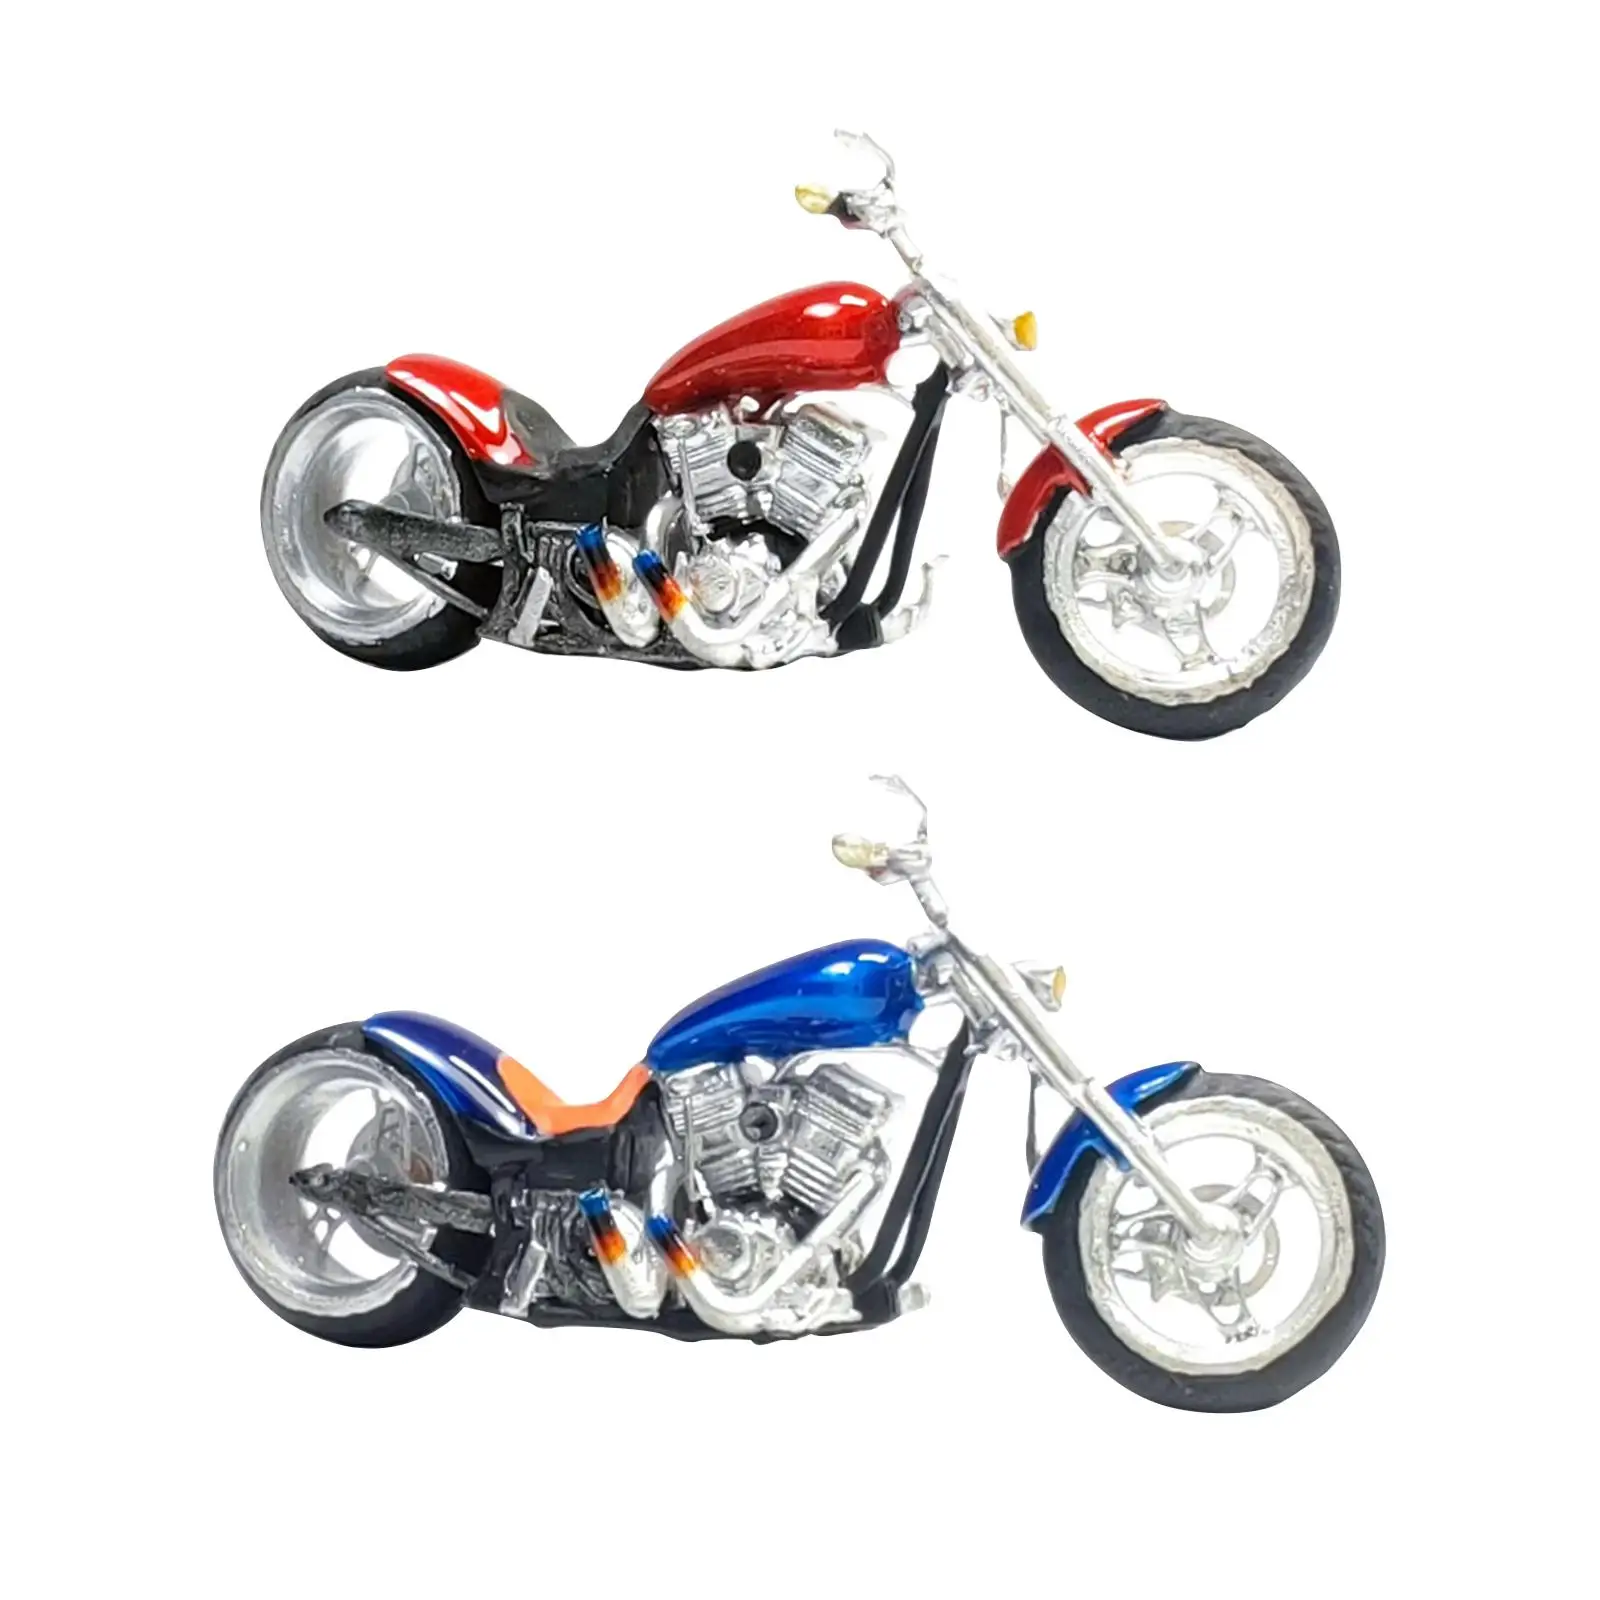 1/64 Painted Motocycle Model Vehicle Model Figurines for Layout Street Scene